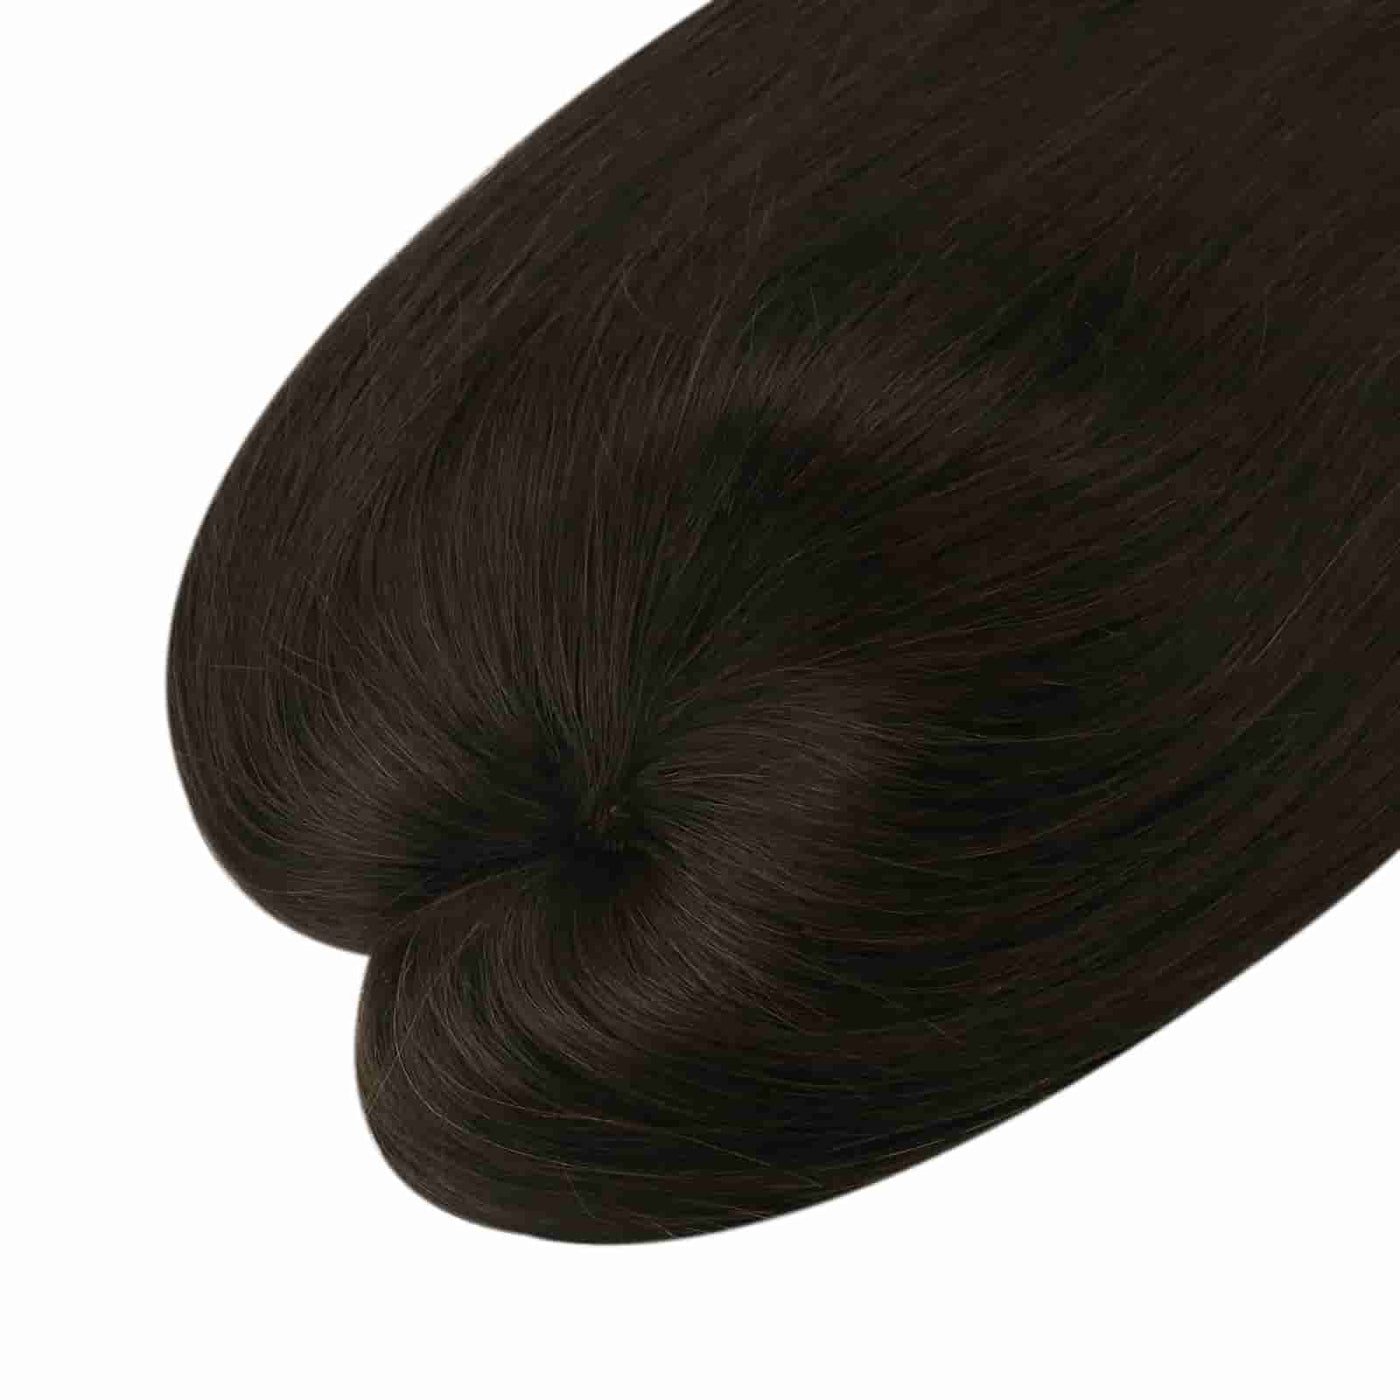 [US Only][Half Price][150% High Density Upgrade] Remy Base Medium Hair Toppers No Bangs Hair Darkest Brown for Thinning Hair (#2)